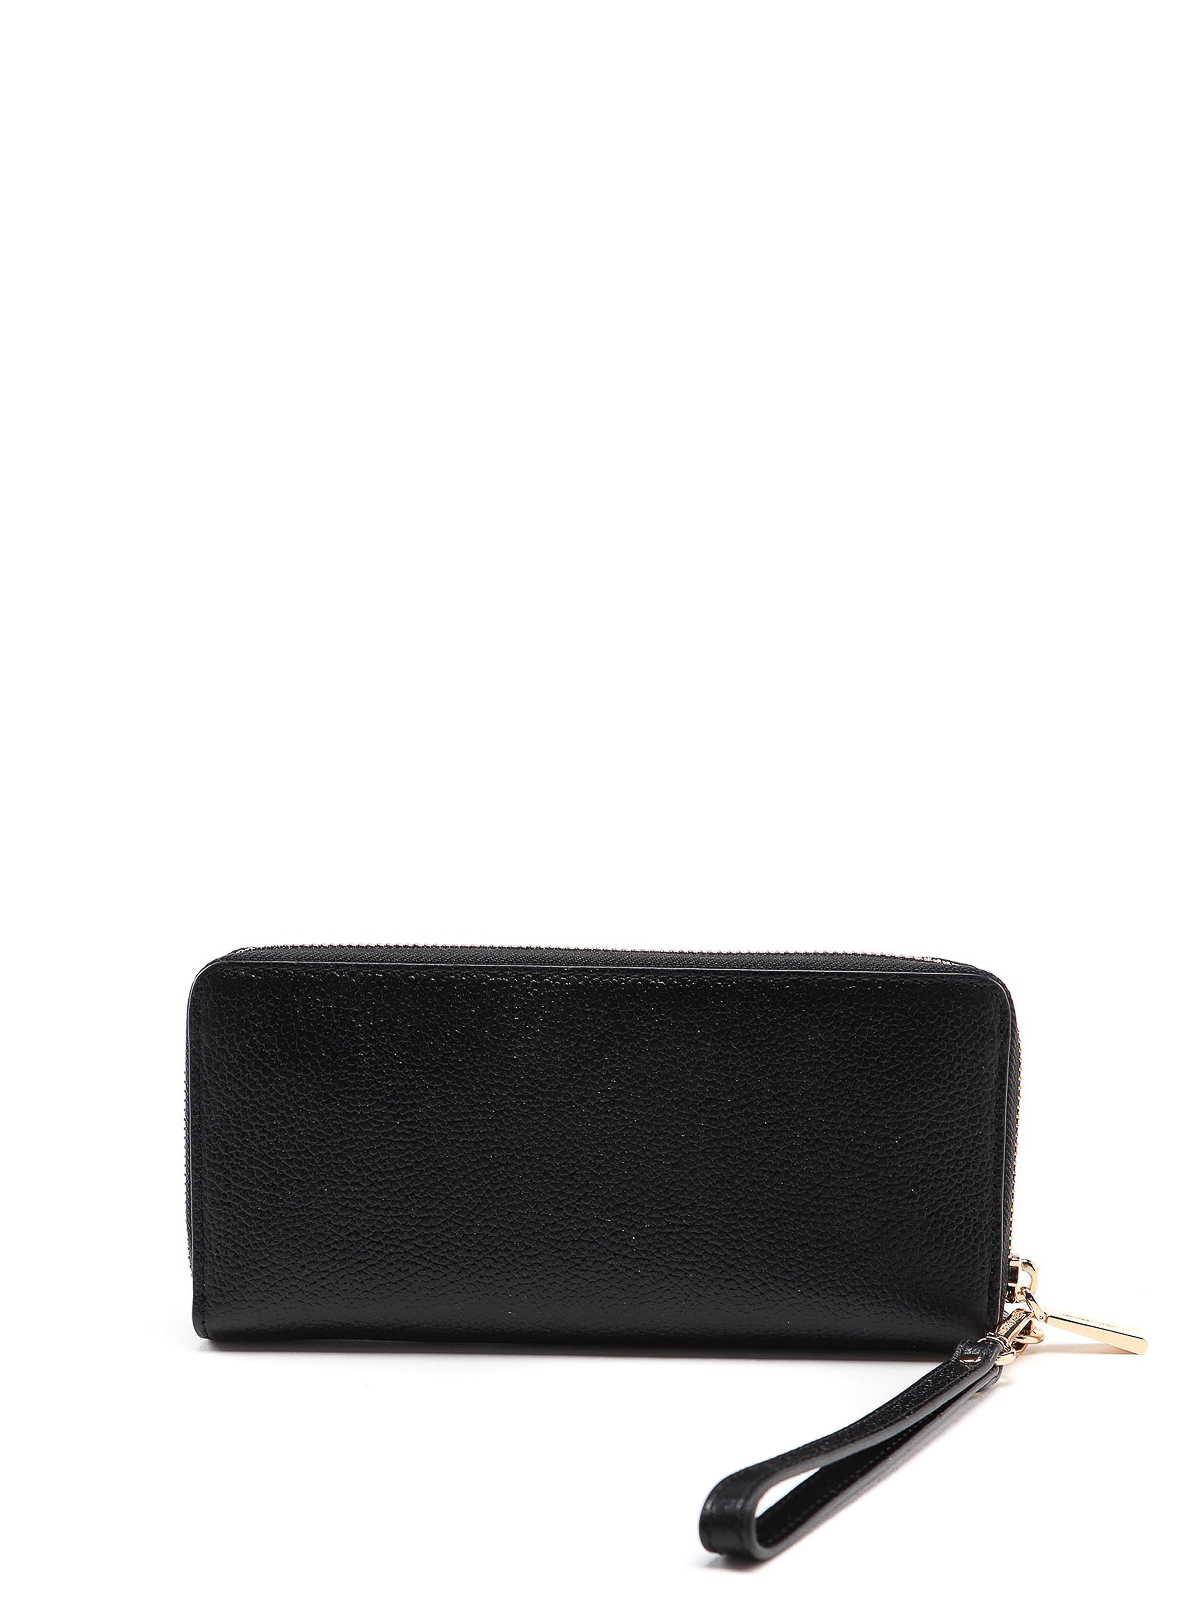 Women's Travel Continental Leather Wallet - Black 